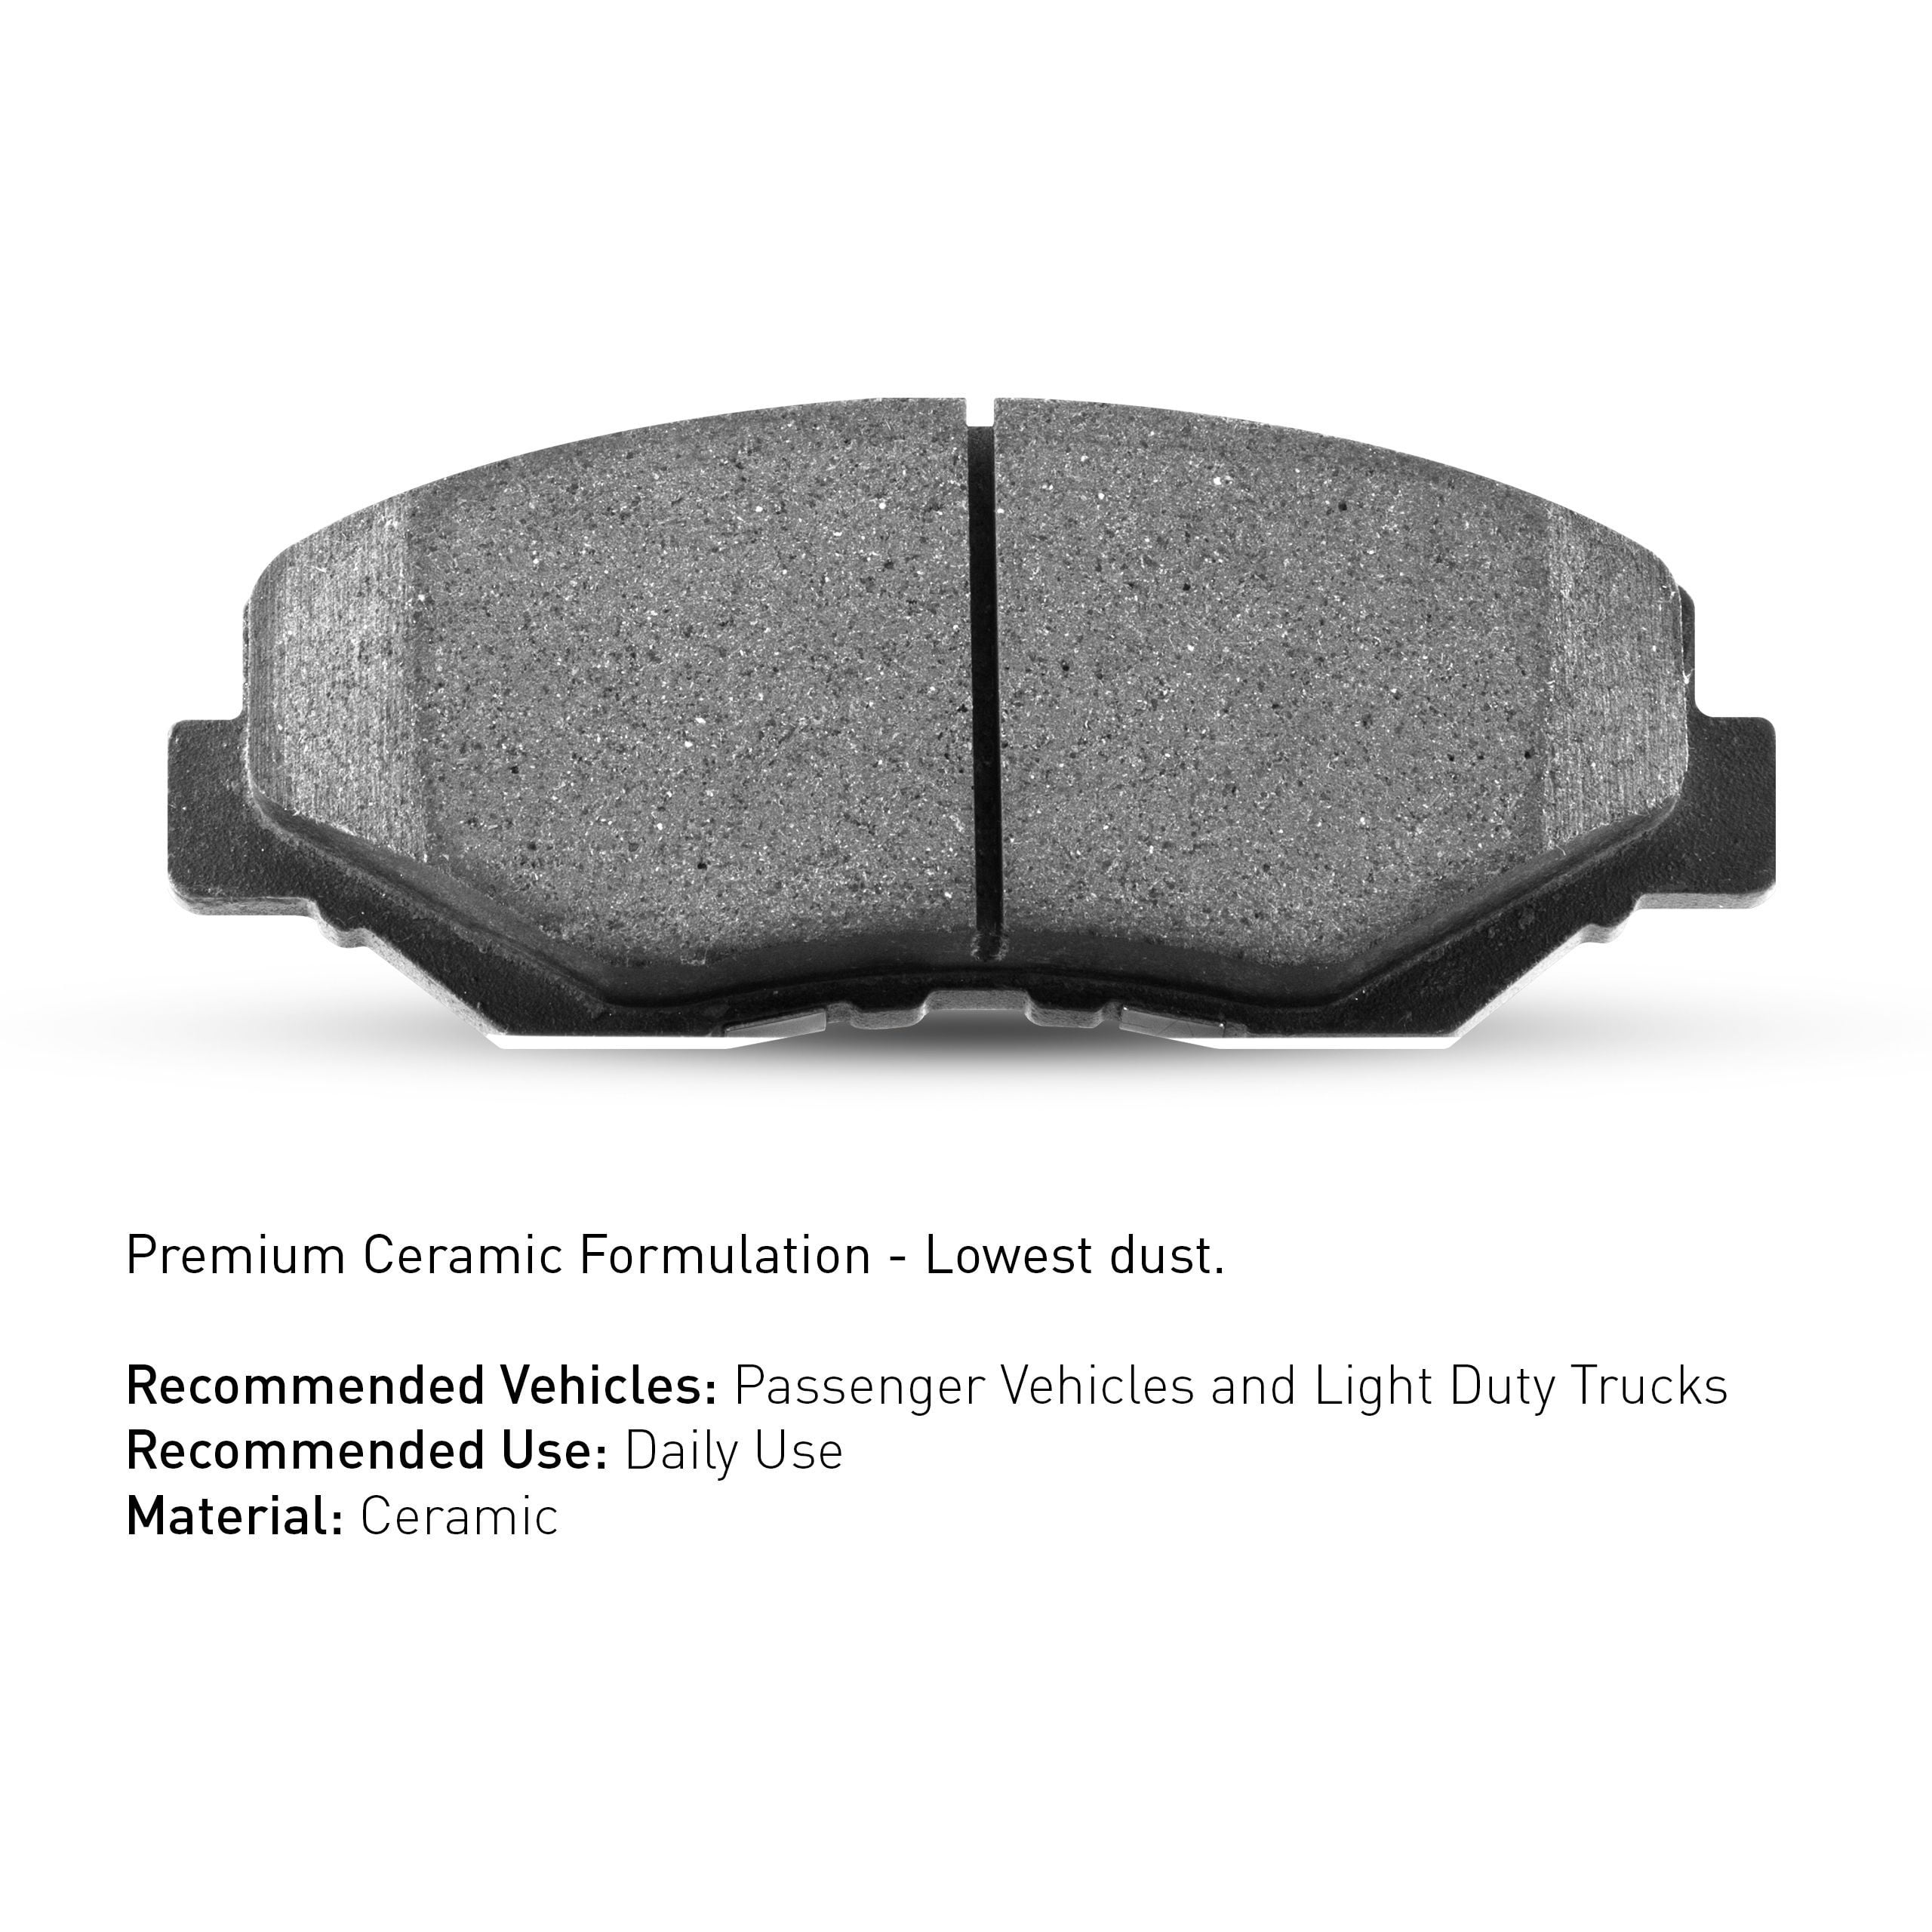 Rear R1 Concepts Ceramic Series Brake Pad With Rubber Steel Rubber Shims